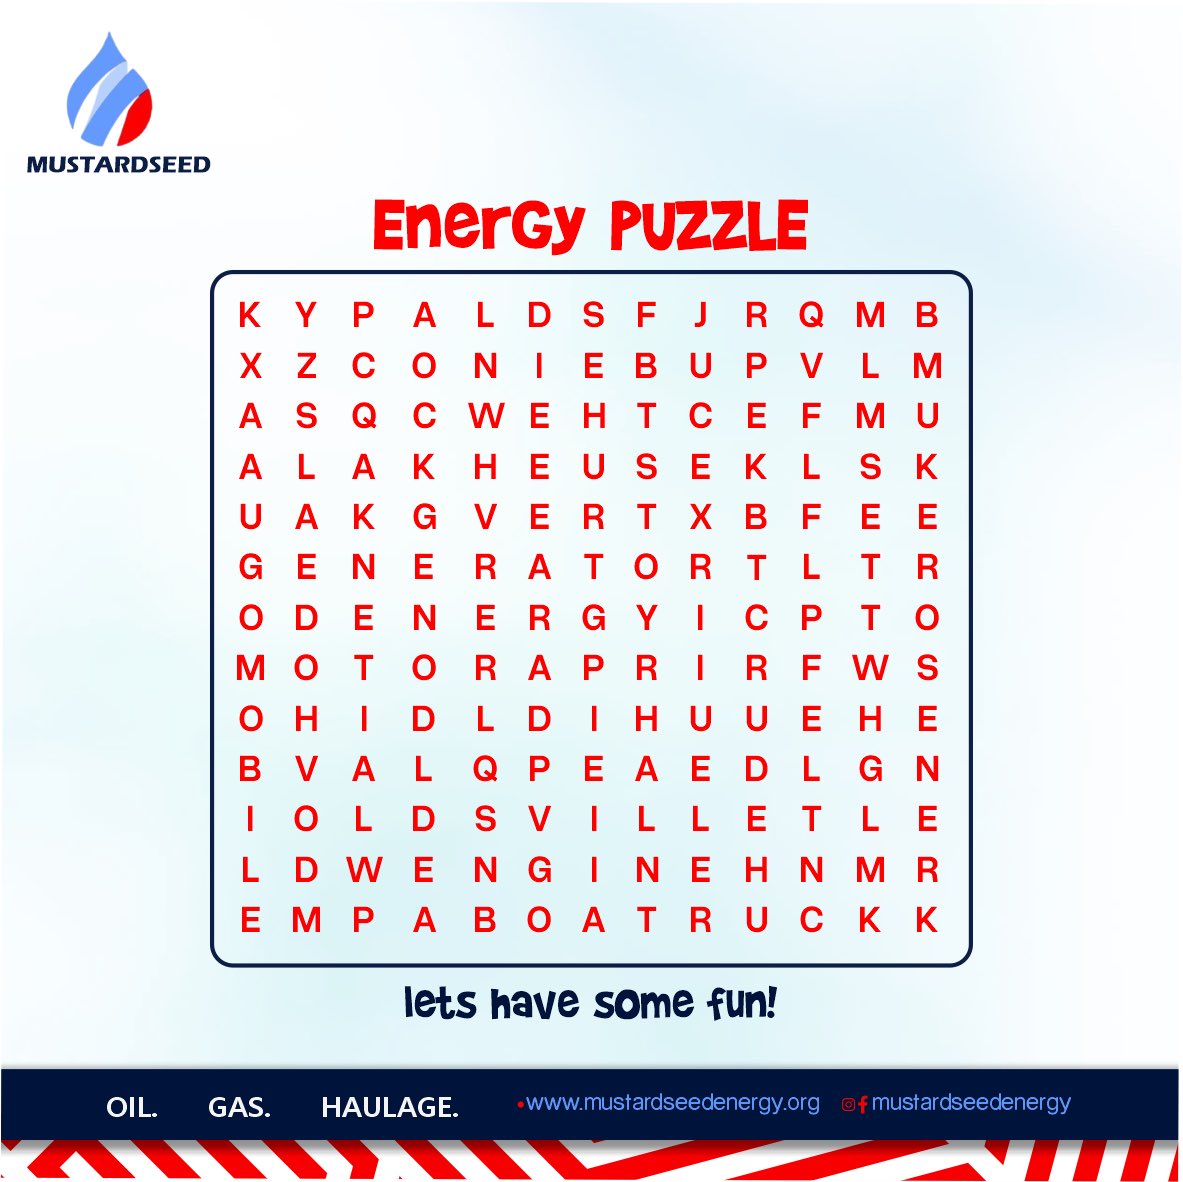 Let's have a brain teaser for the weekend.
Piece up the puzzle to uncover engine secrets.
Hint: Words commonly used in the energy sector.
Let the game begin!
#TGIF 
#mustardseedenergy
#puzzlefun